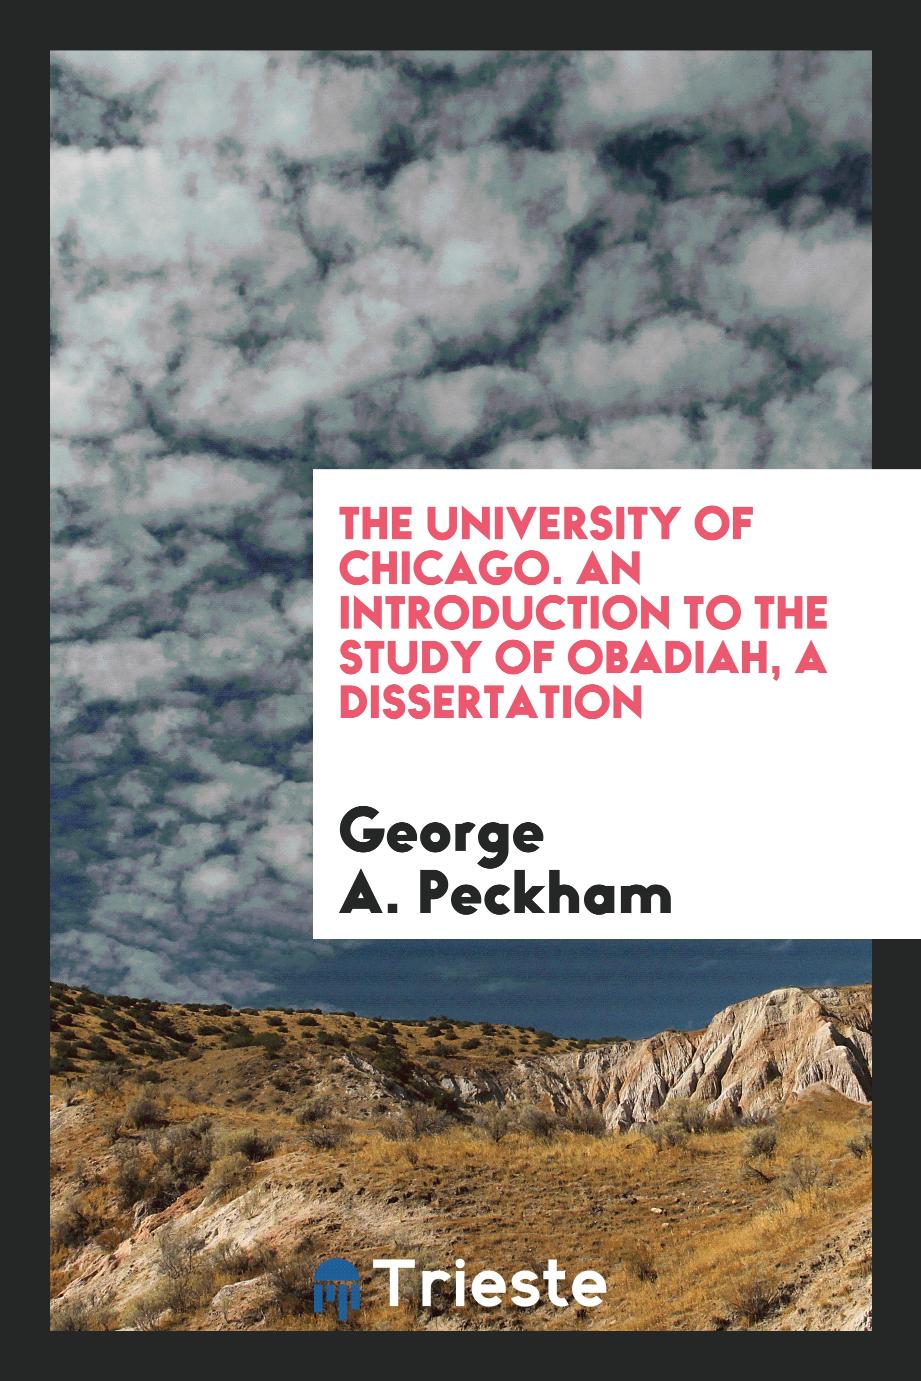 the university of Chicago. An introduction to the study of Obadiah, a dissertation